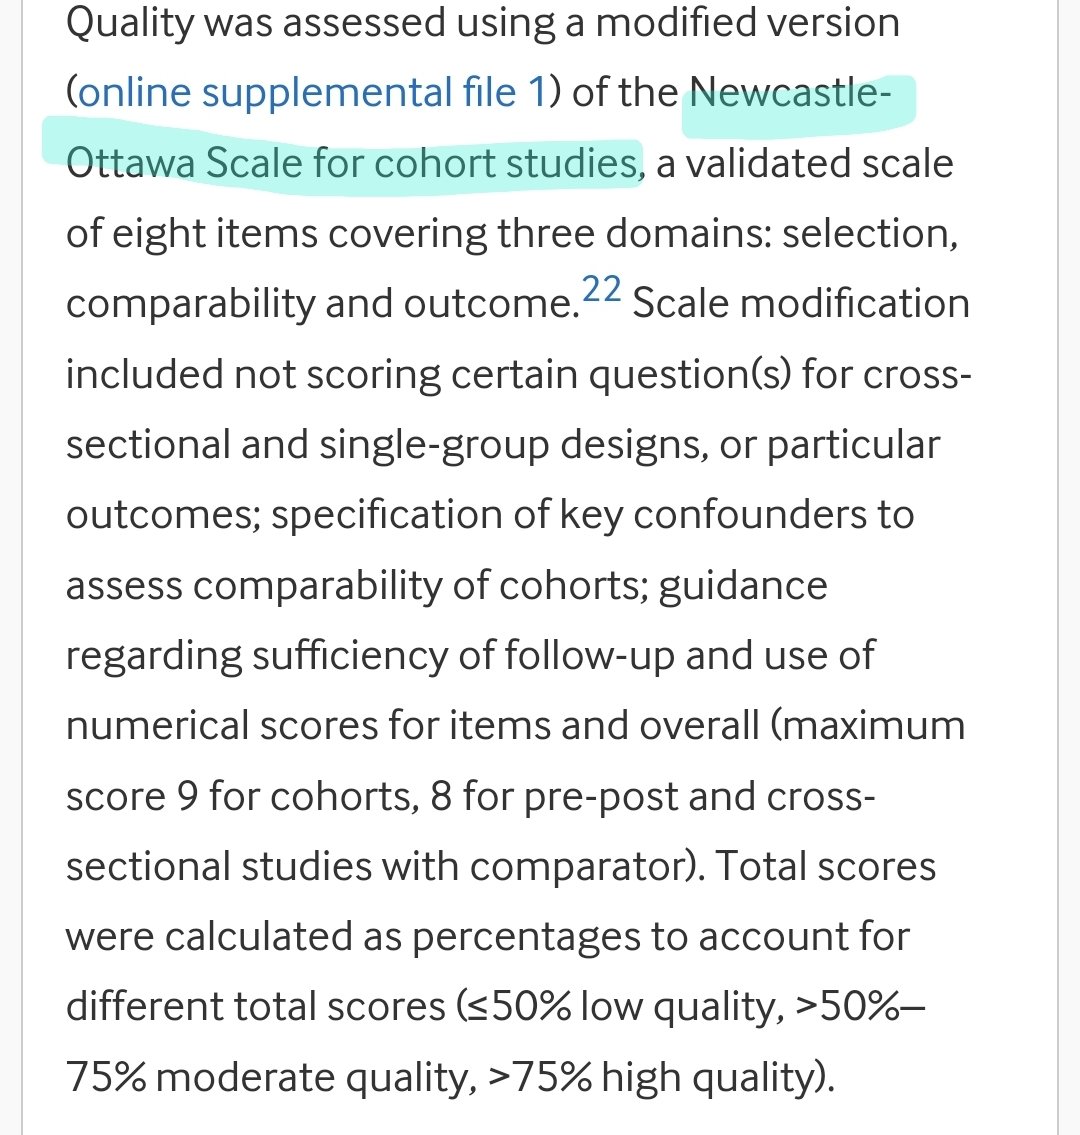 This image is from the review on puberty blockers, and it states it uses a modified Newcastle-Ottawa scale to assess quality. This scale is explicitly designed for non-RCTs. This means that studies can be rated as high quality despite not being RCTs, ie not being double blind.